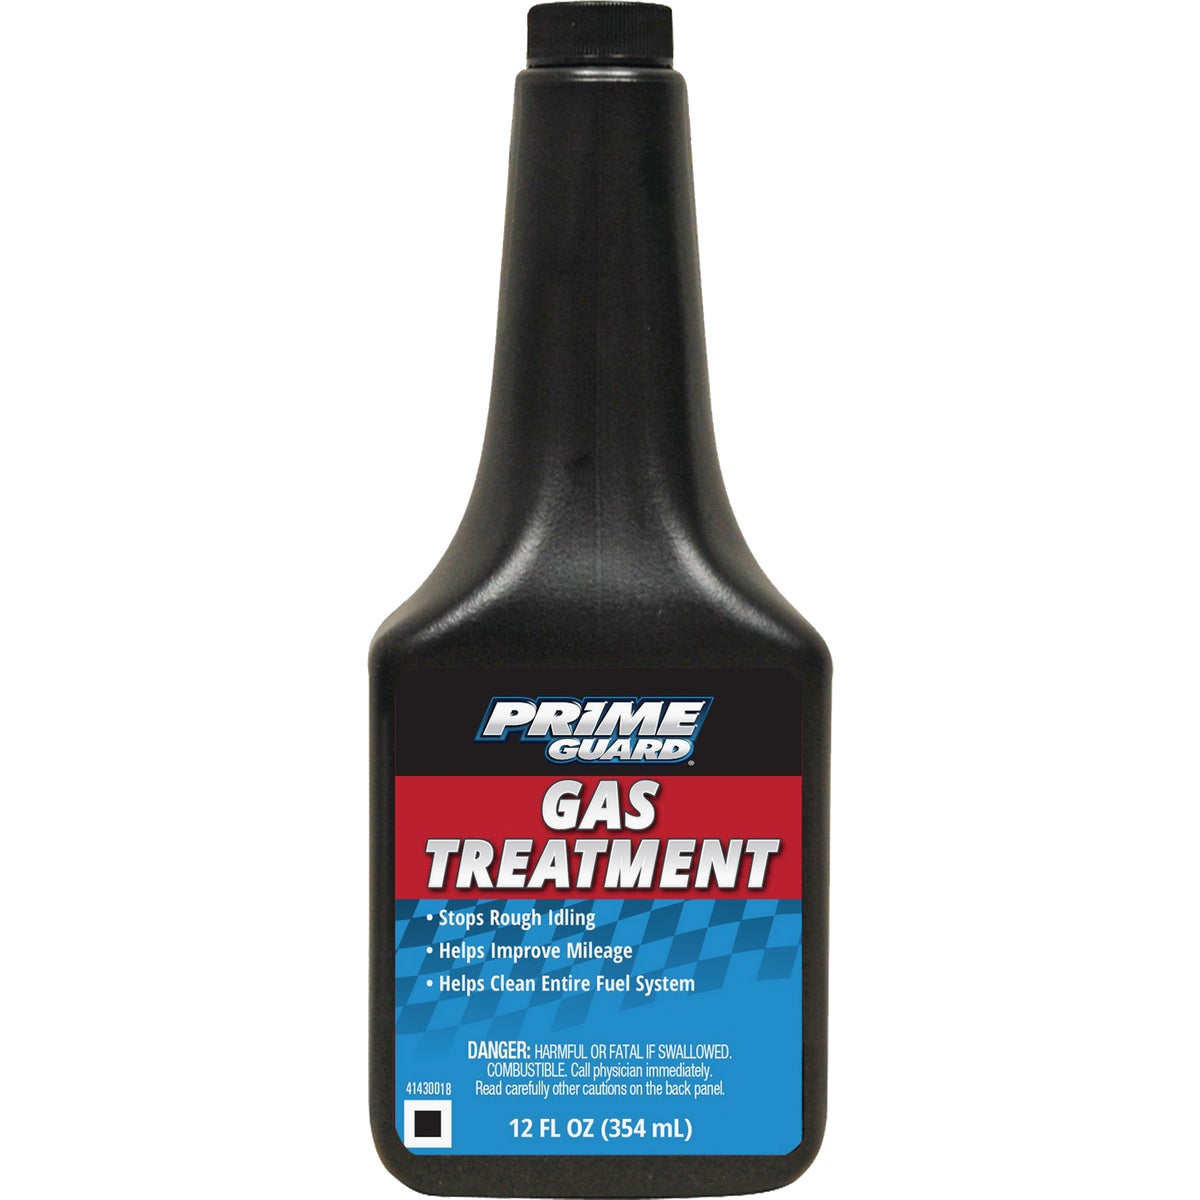 Item 584150, Cleans entire fuel system and helps improve mileage.